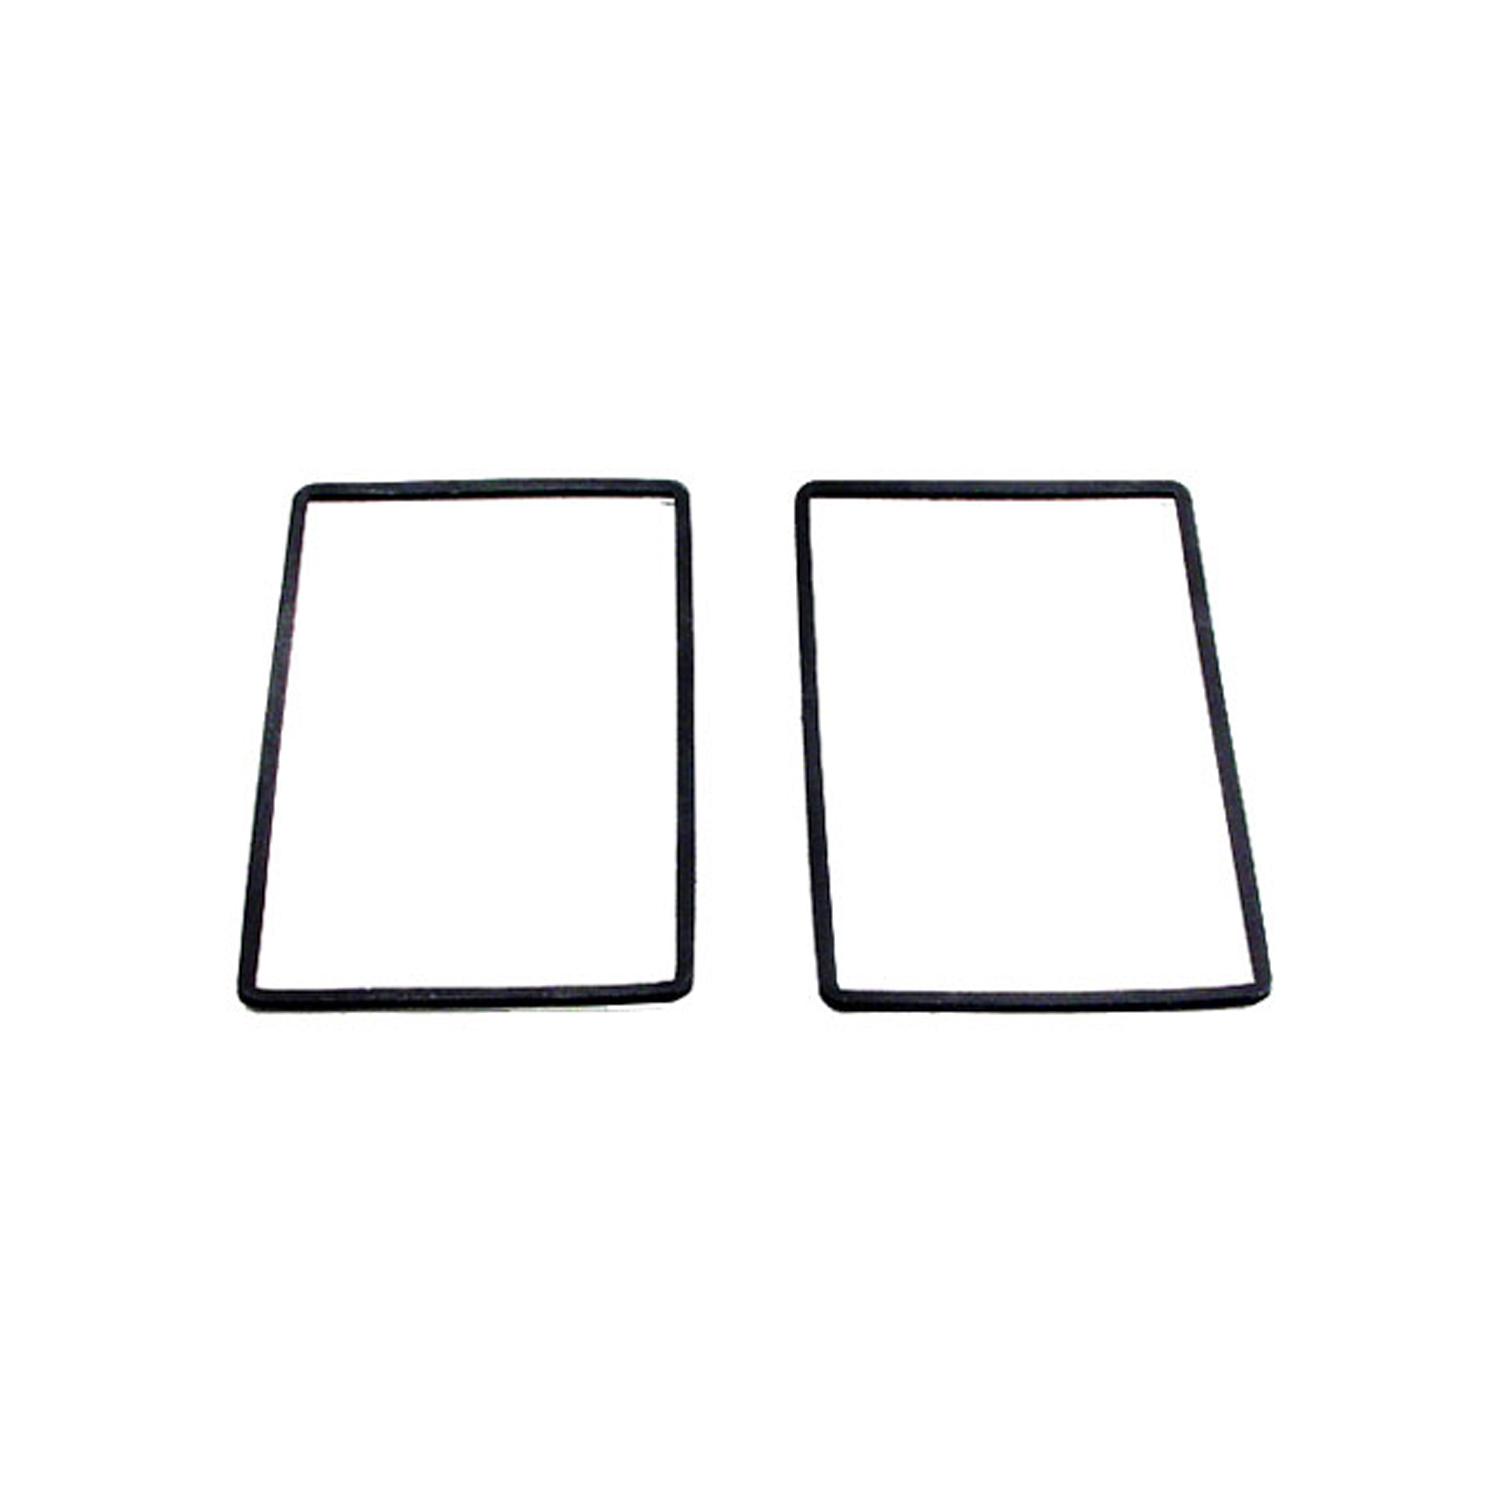 1954 Willys Station Wagon Tail-light Bezel Lens Gaskets.  2-3/4 X 2-5/16.  Pair-LG 9600-120